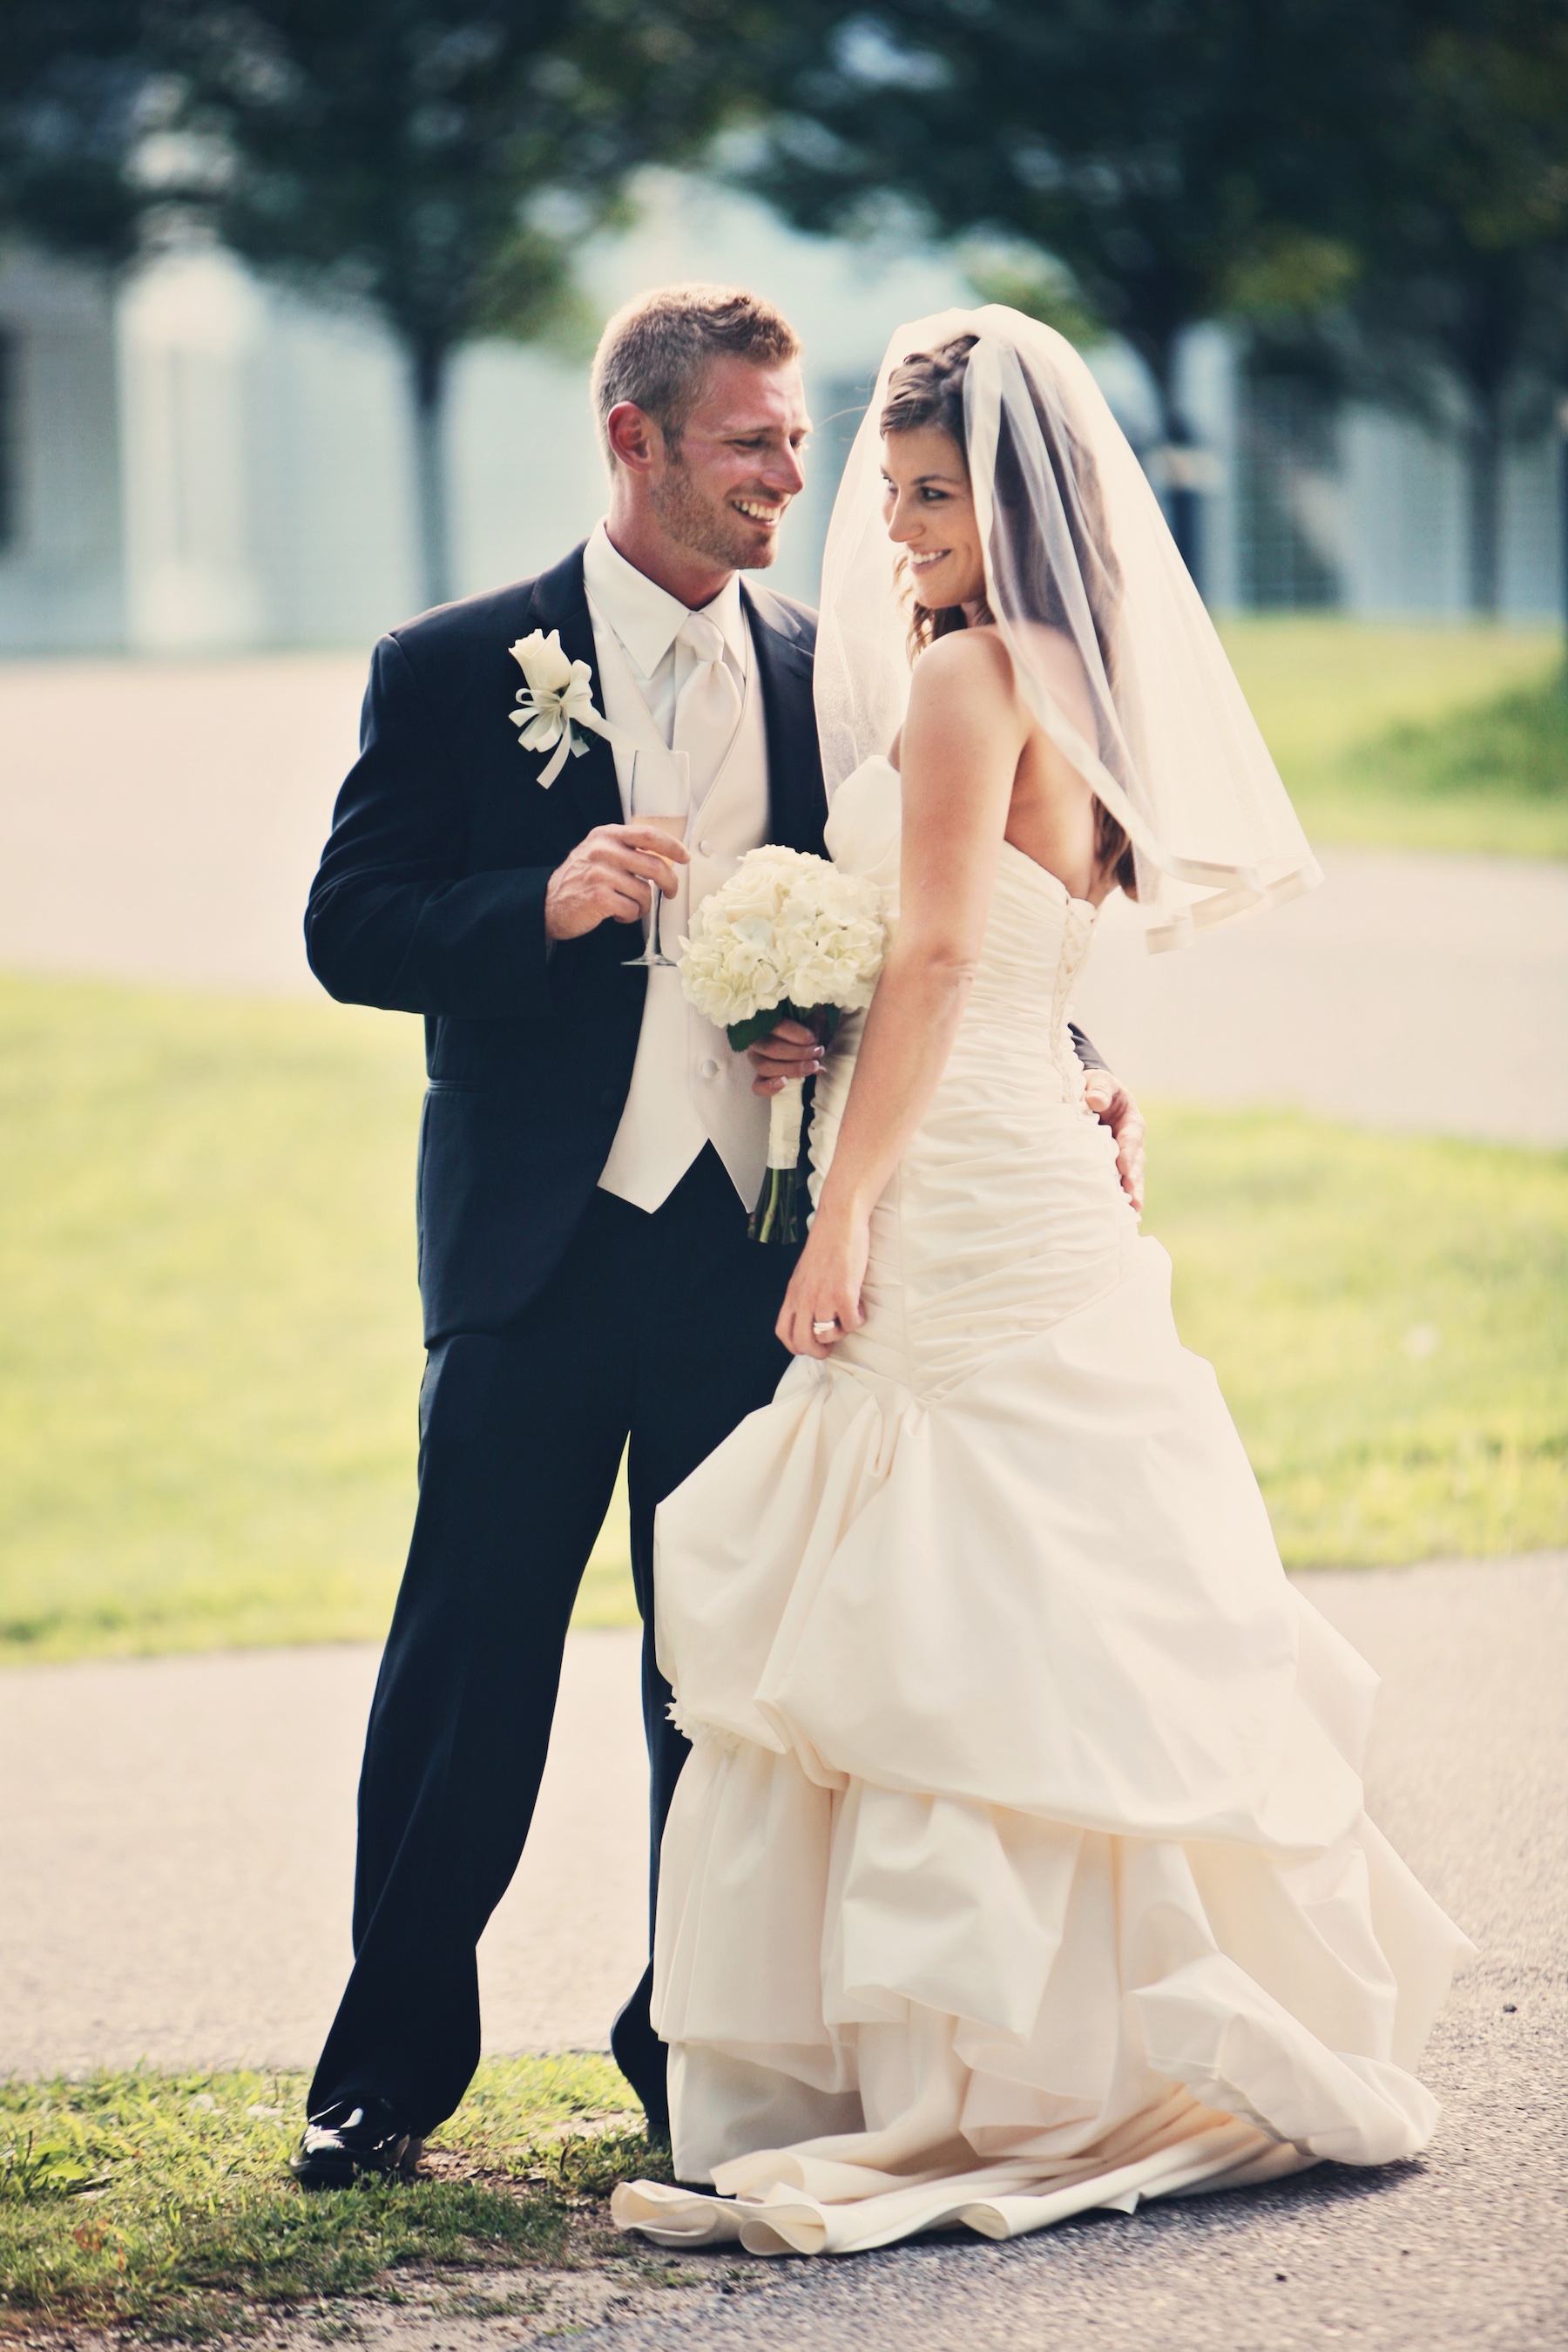 Wedding Groom Photos To Inspire You The Wow Style 9342